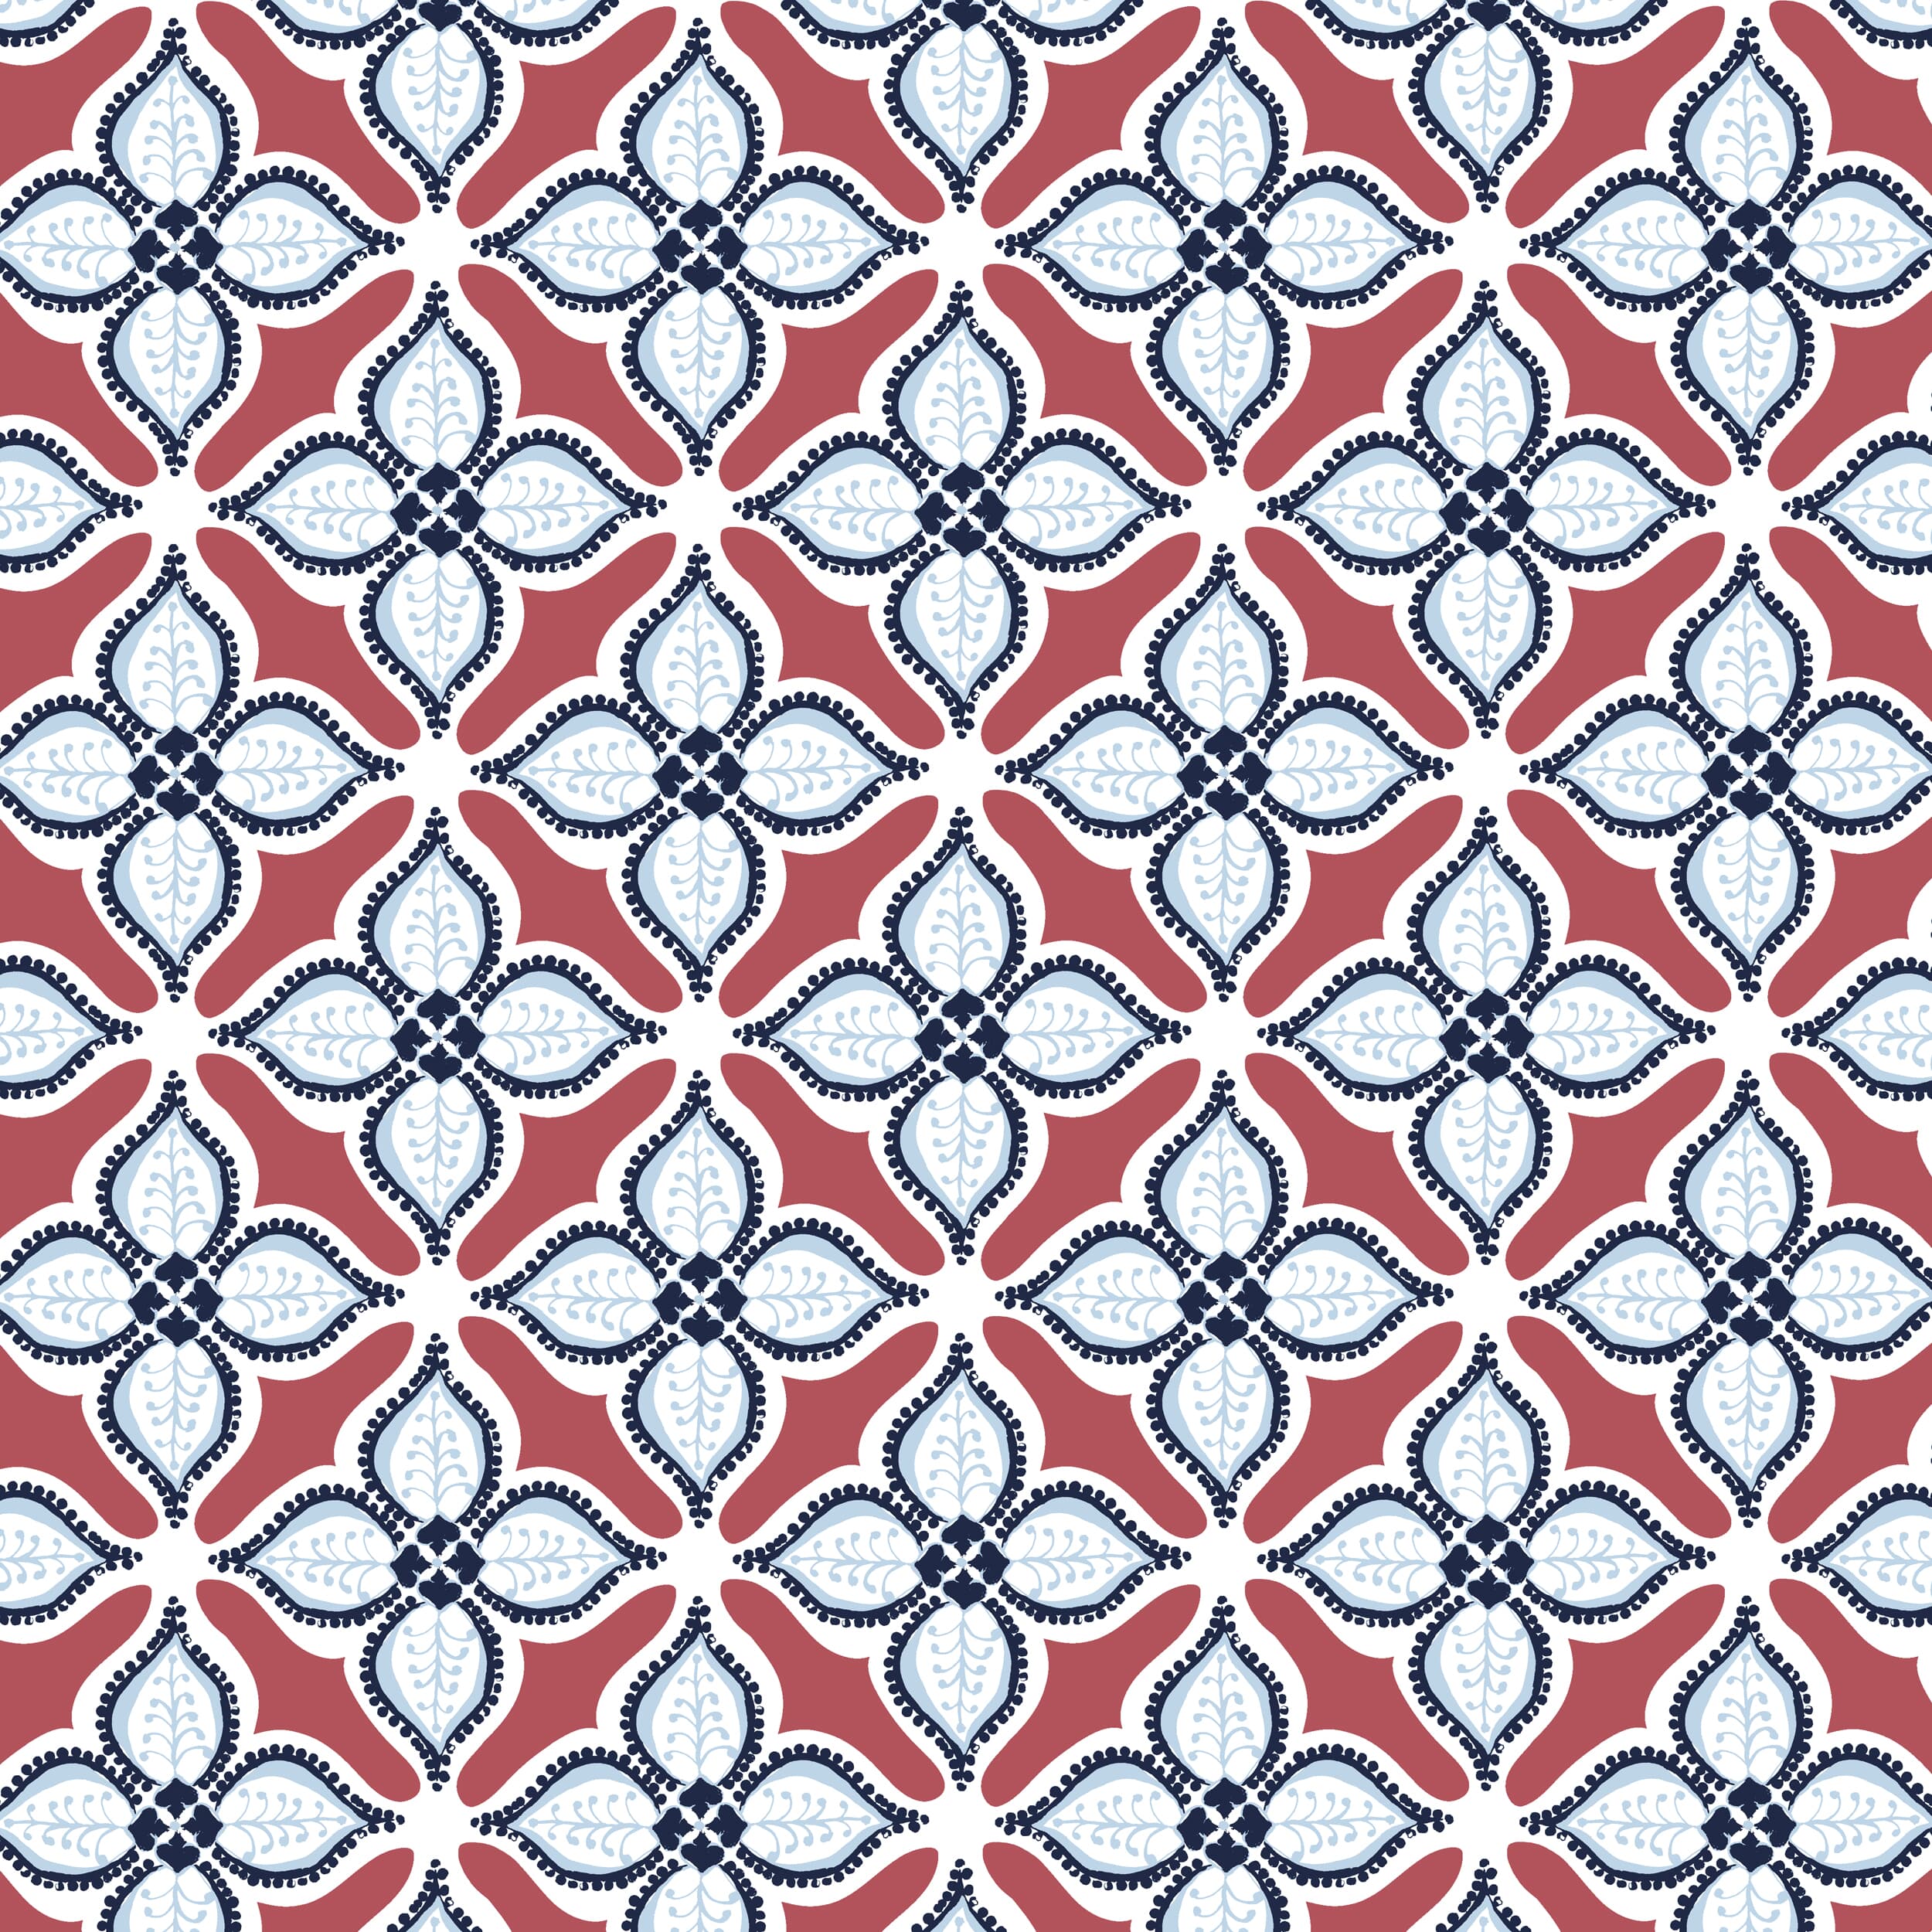 W03vl-5 Glimmer Red Wallpaper by Stout Fabric